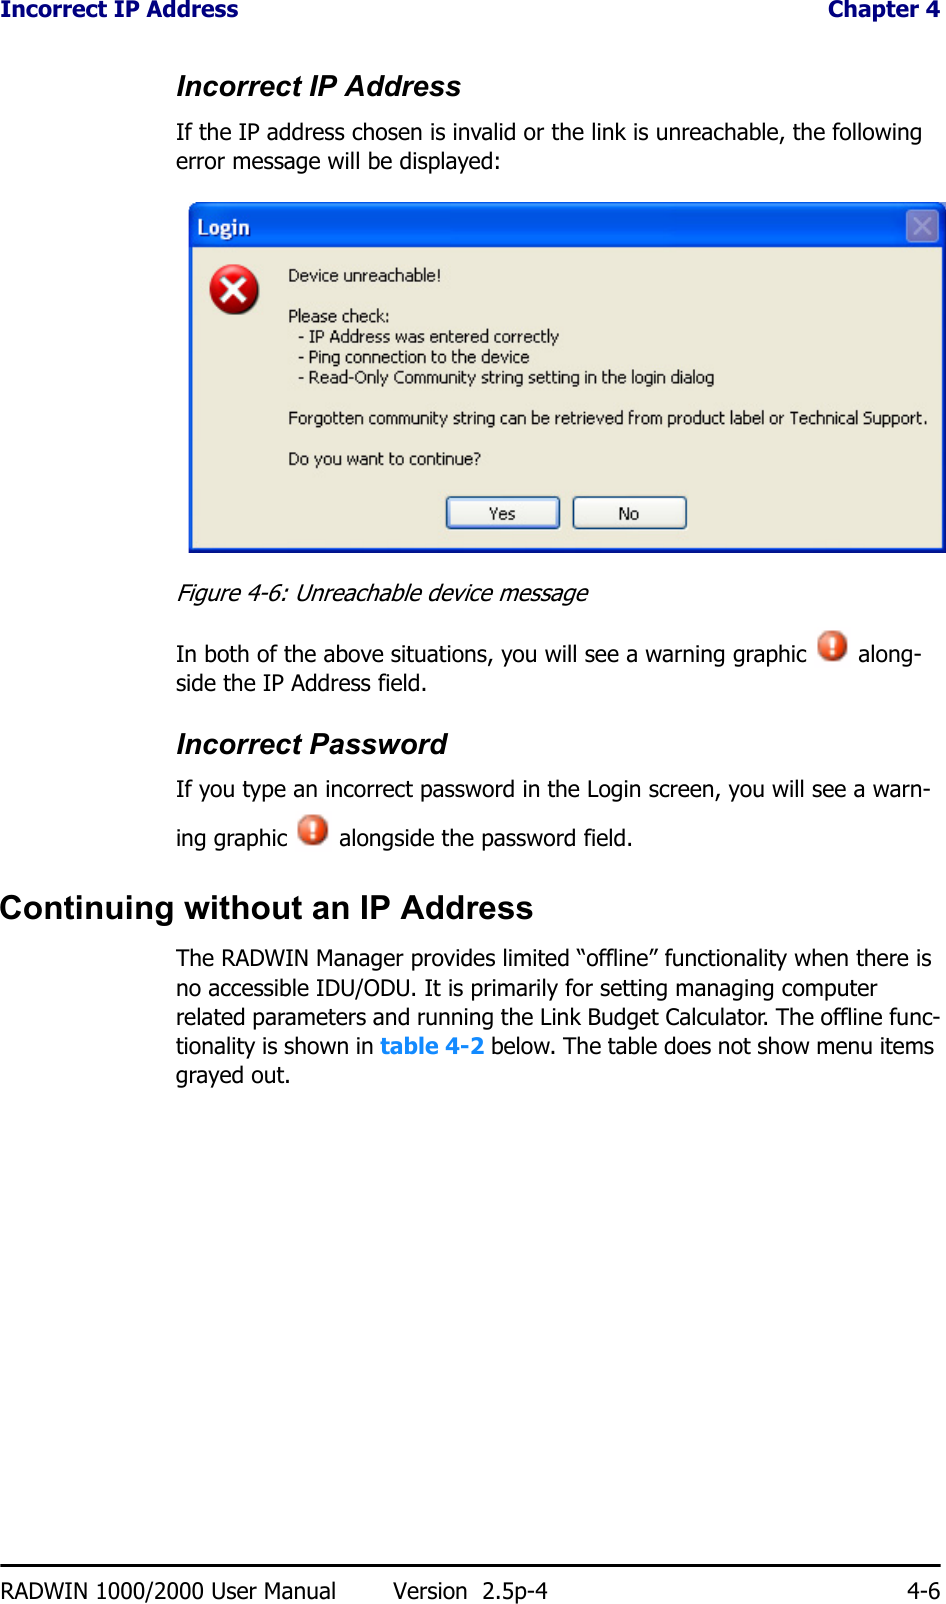 Incorrect IP Address  Chapter 4RADWIN 1000/2000 User Manual Version  2.5p-4 4-6Incorrect IP AddressIf the IP address chosen is invalid or the link is unreachable, the following error message will be displayed:Figure 4-6: Unreachable device messageIn both of the above situations, you will see a warning graphic   along-side the IP Address field.Incorrect PasswordIf you type an incorrect password in the Login screen, you will see a warn-ing graphic   alongside the password field.Continuing without an IP AddressThe RADWIN Manager provides limited “offline” functionality when there is no accessible IDU/ODU. It is primarily for setting managing computer related parameters and running the Link Budget Calculator. The offline func-tionality is shown in table 4-2 below. The table does not show menu items grayed out.